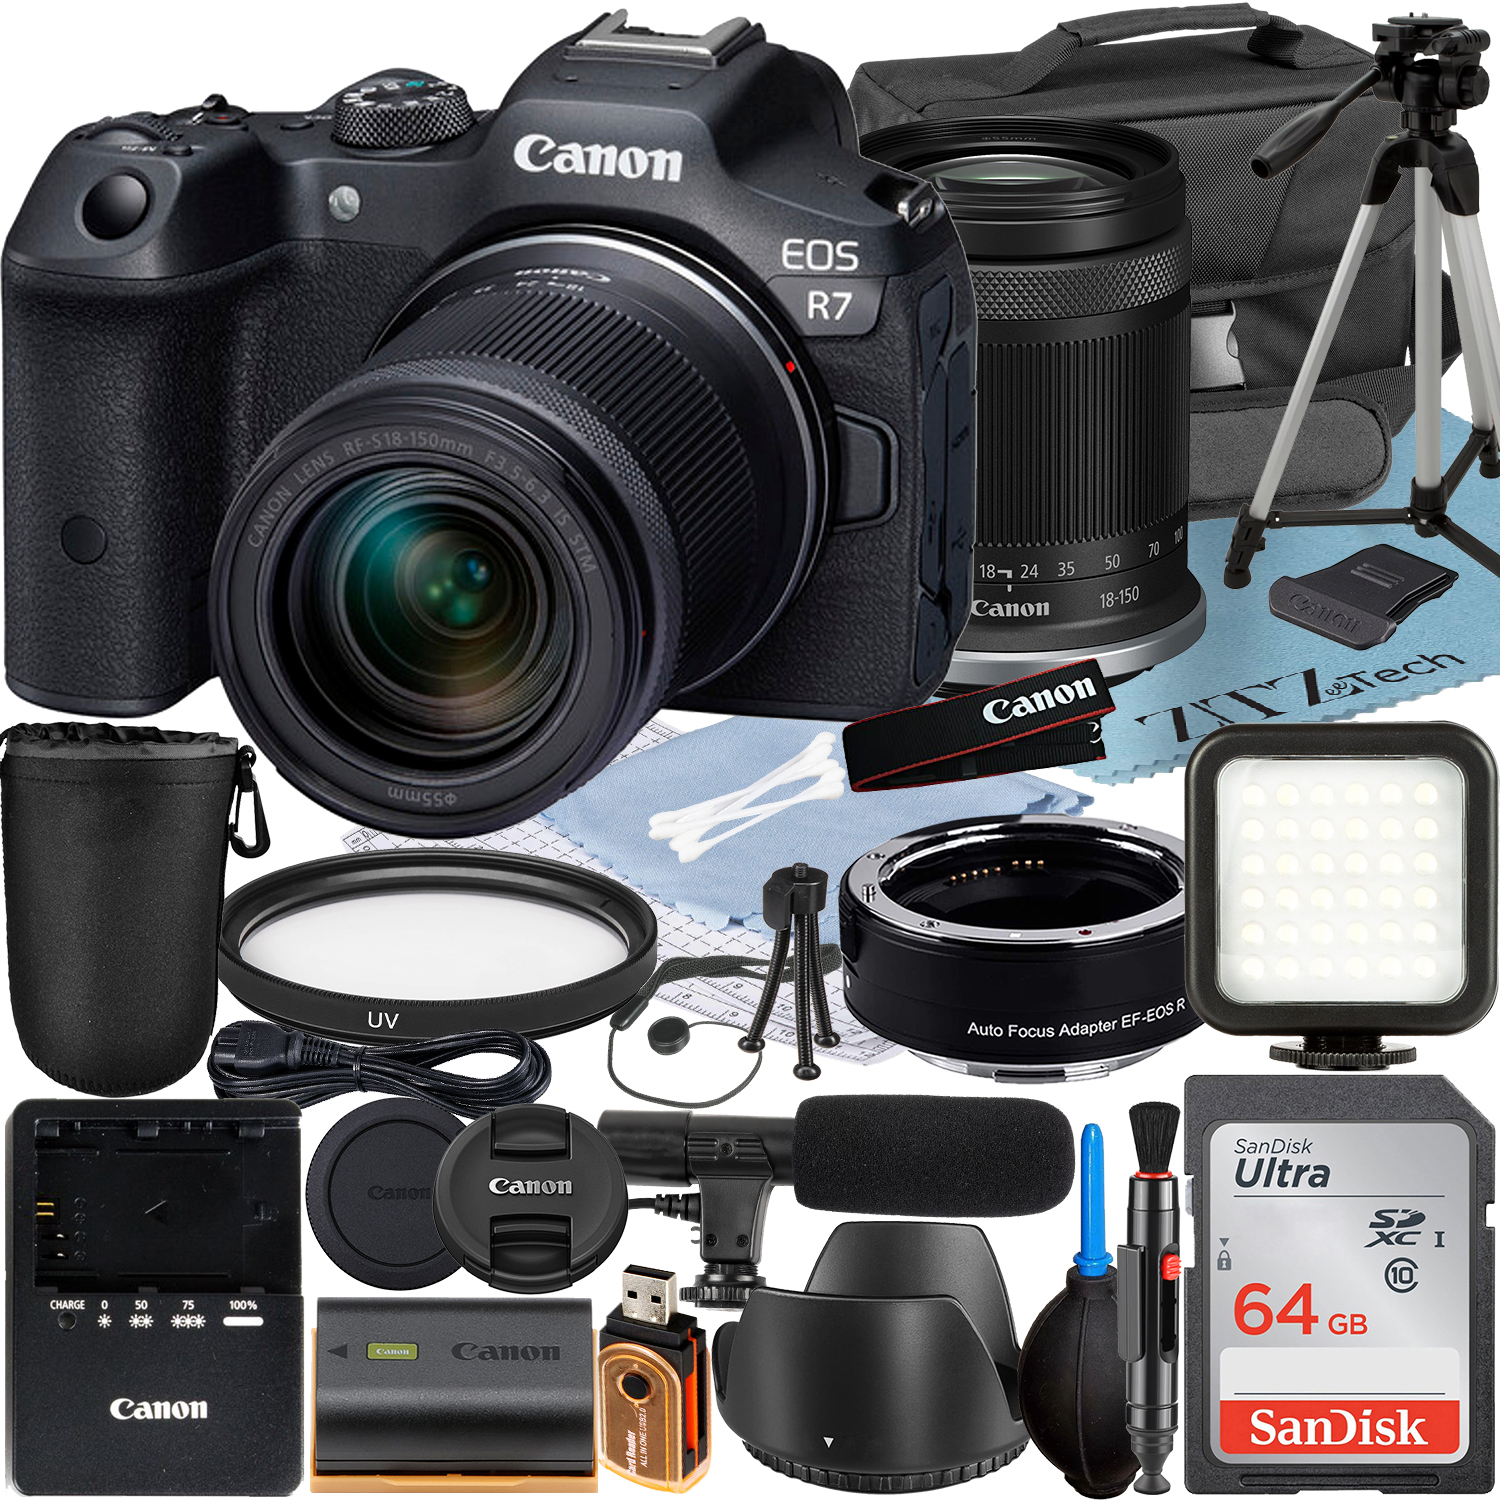 Canon EOS R7 Mirrorless Camera with RF-S 18-150mm Lens + Mount Adapter + SanDisk 64GB Memory Card + Case + LED Flash + ZeeTech Accessory Bundle